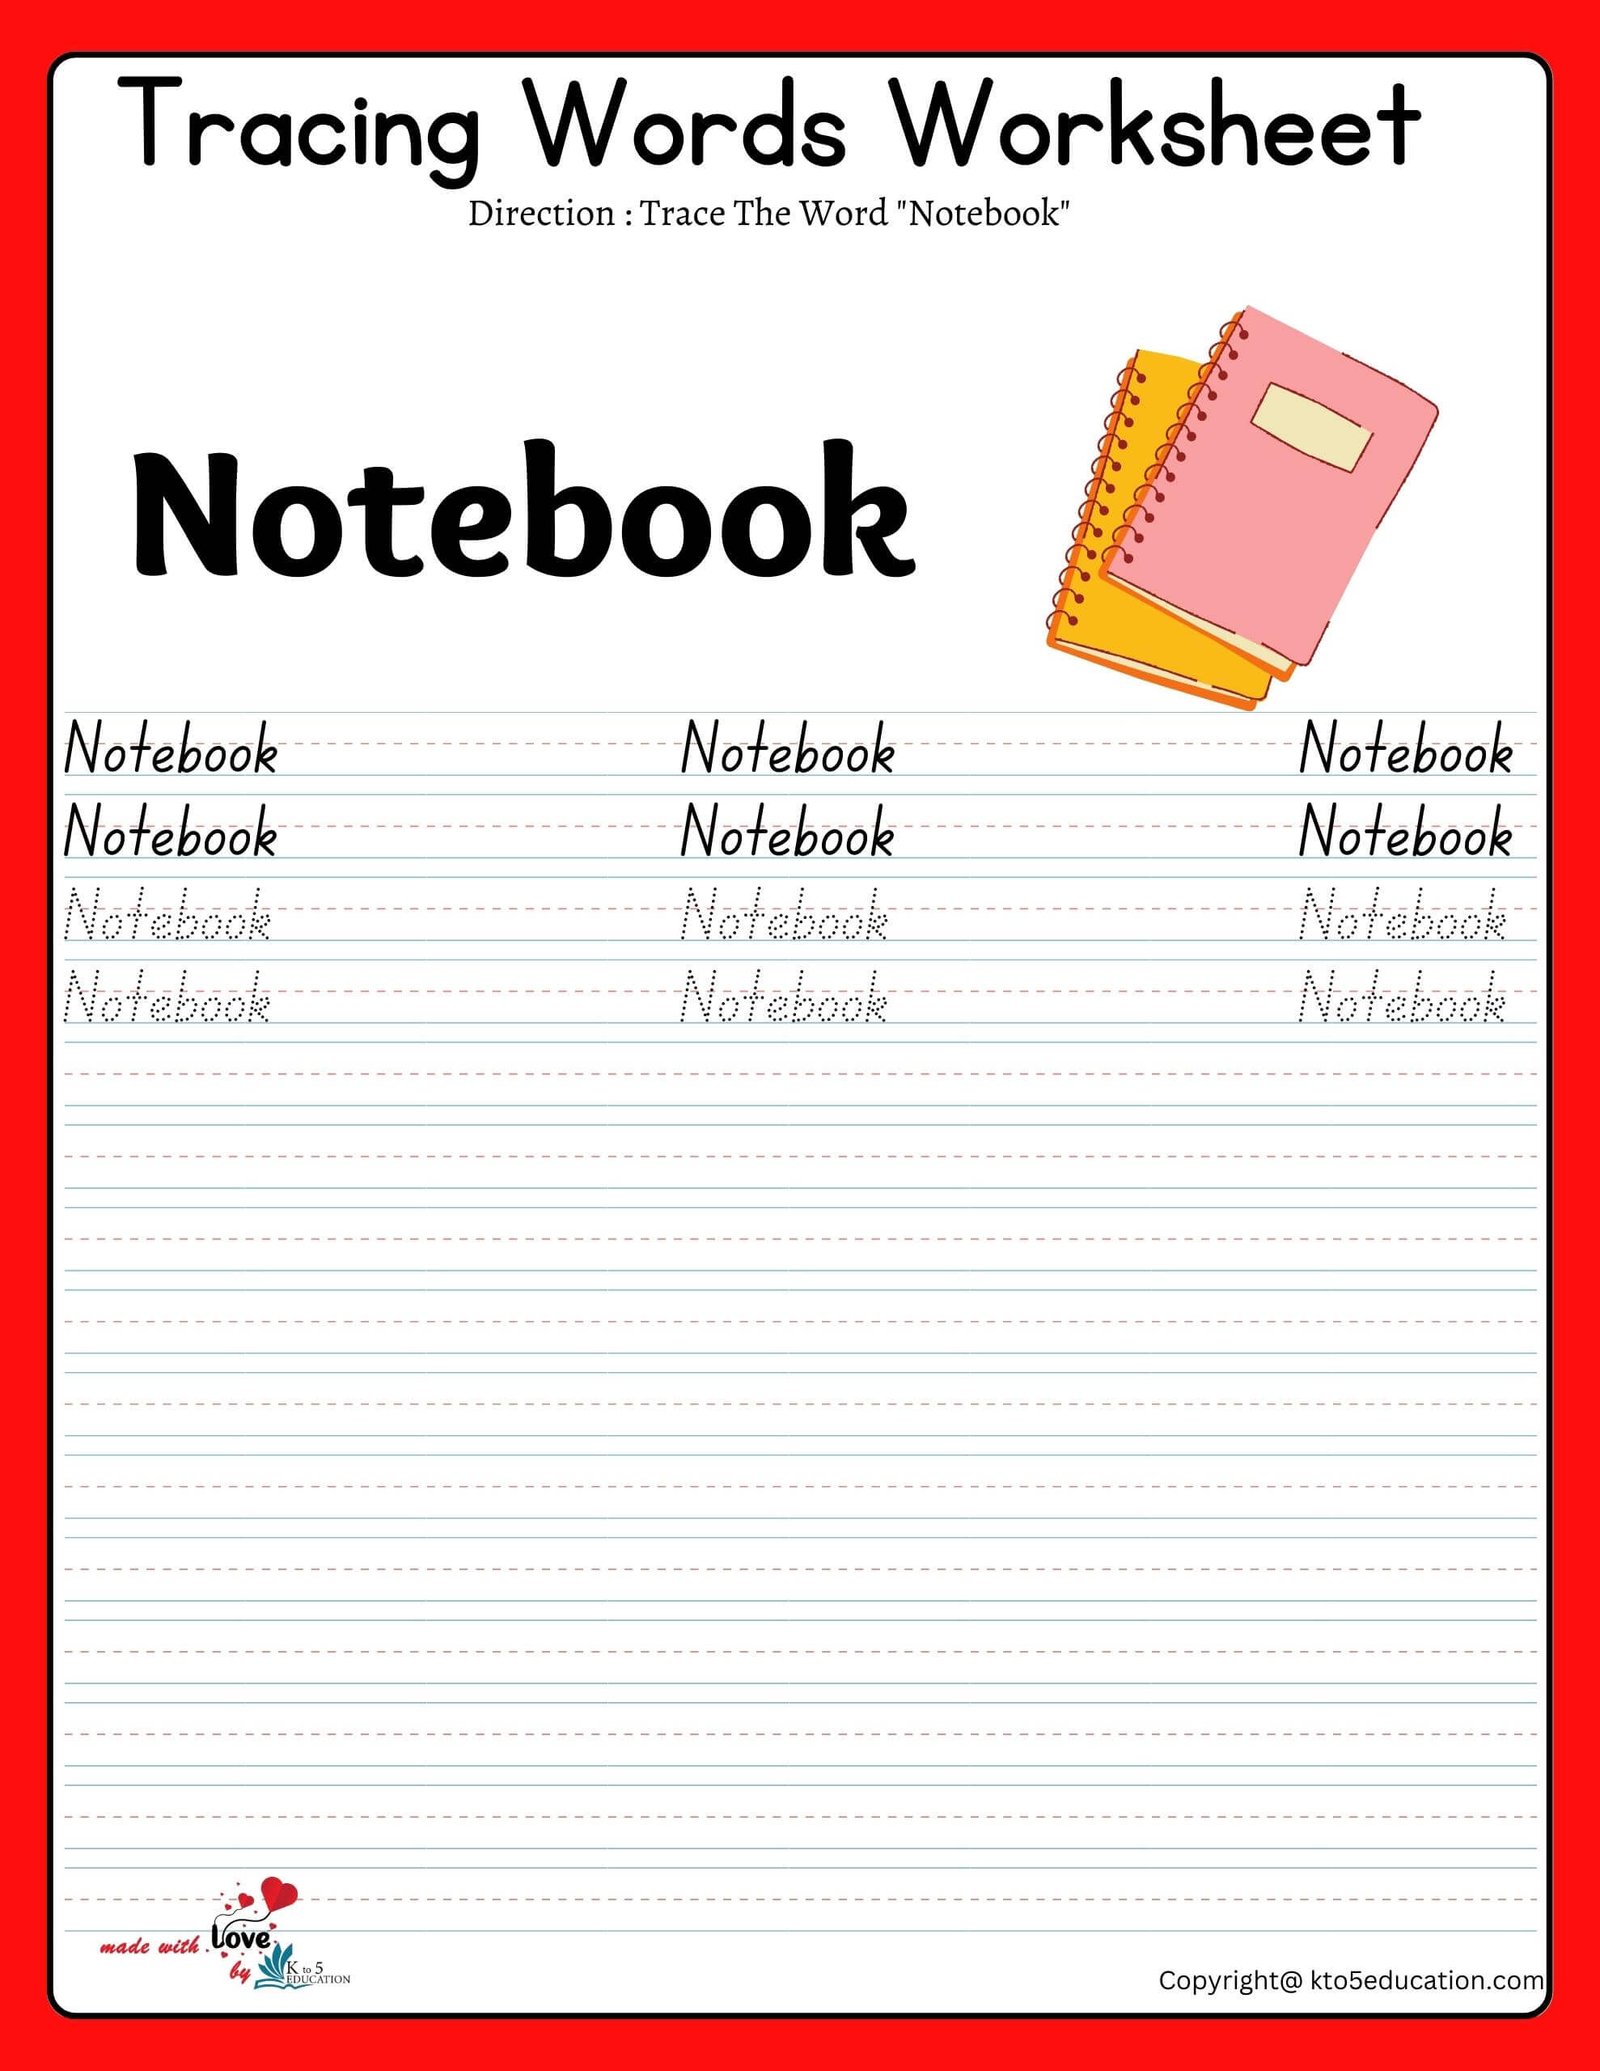 Trace The Word Notebook Worksheet